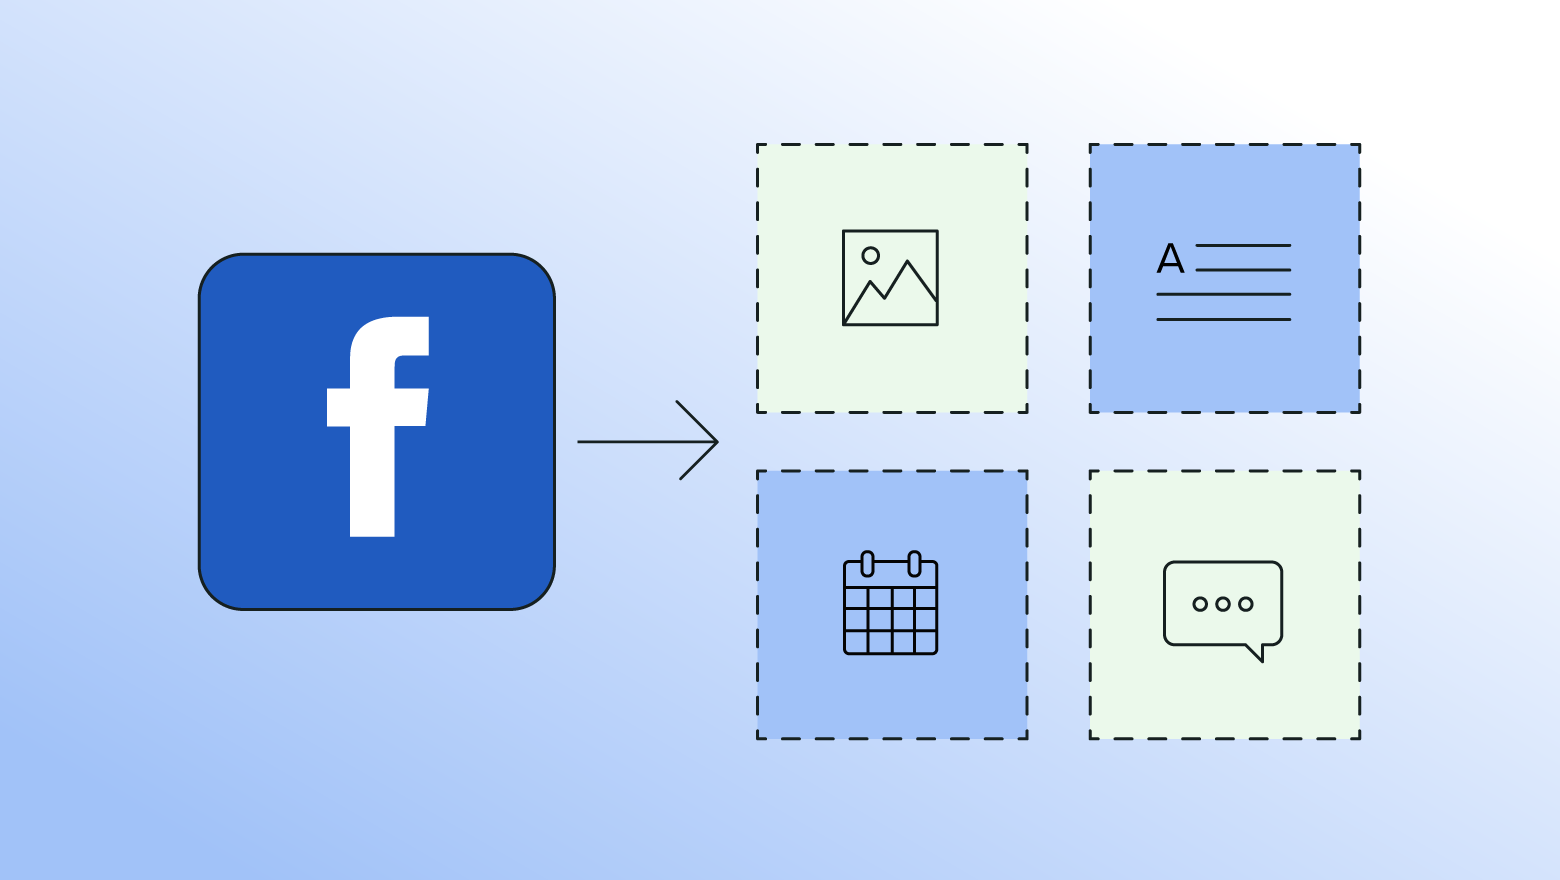 A blue graphic featuring the Facebook logo and an arrow pointing to an image, calendar, text and a word bubble. This is meant to indicate all of the moving pieces that go into a Facebook marketing strategy.